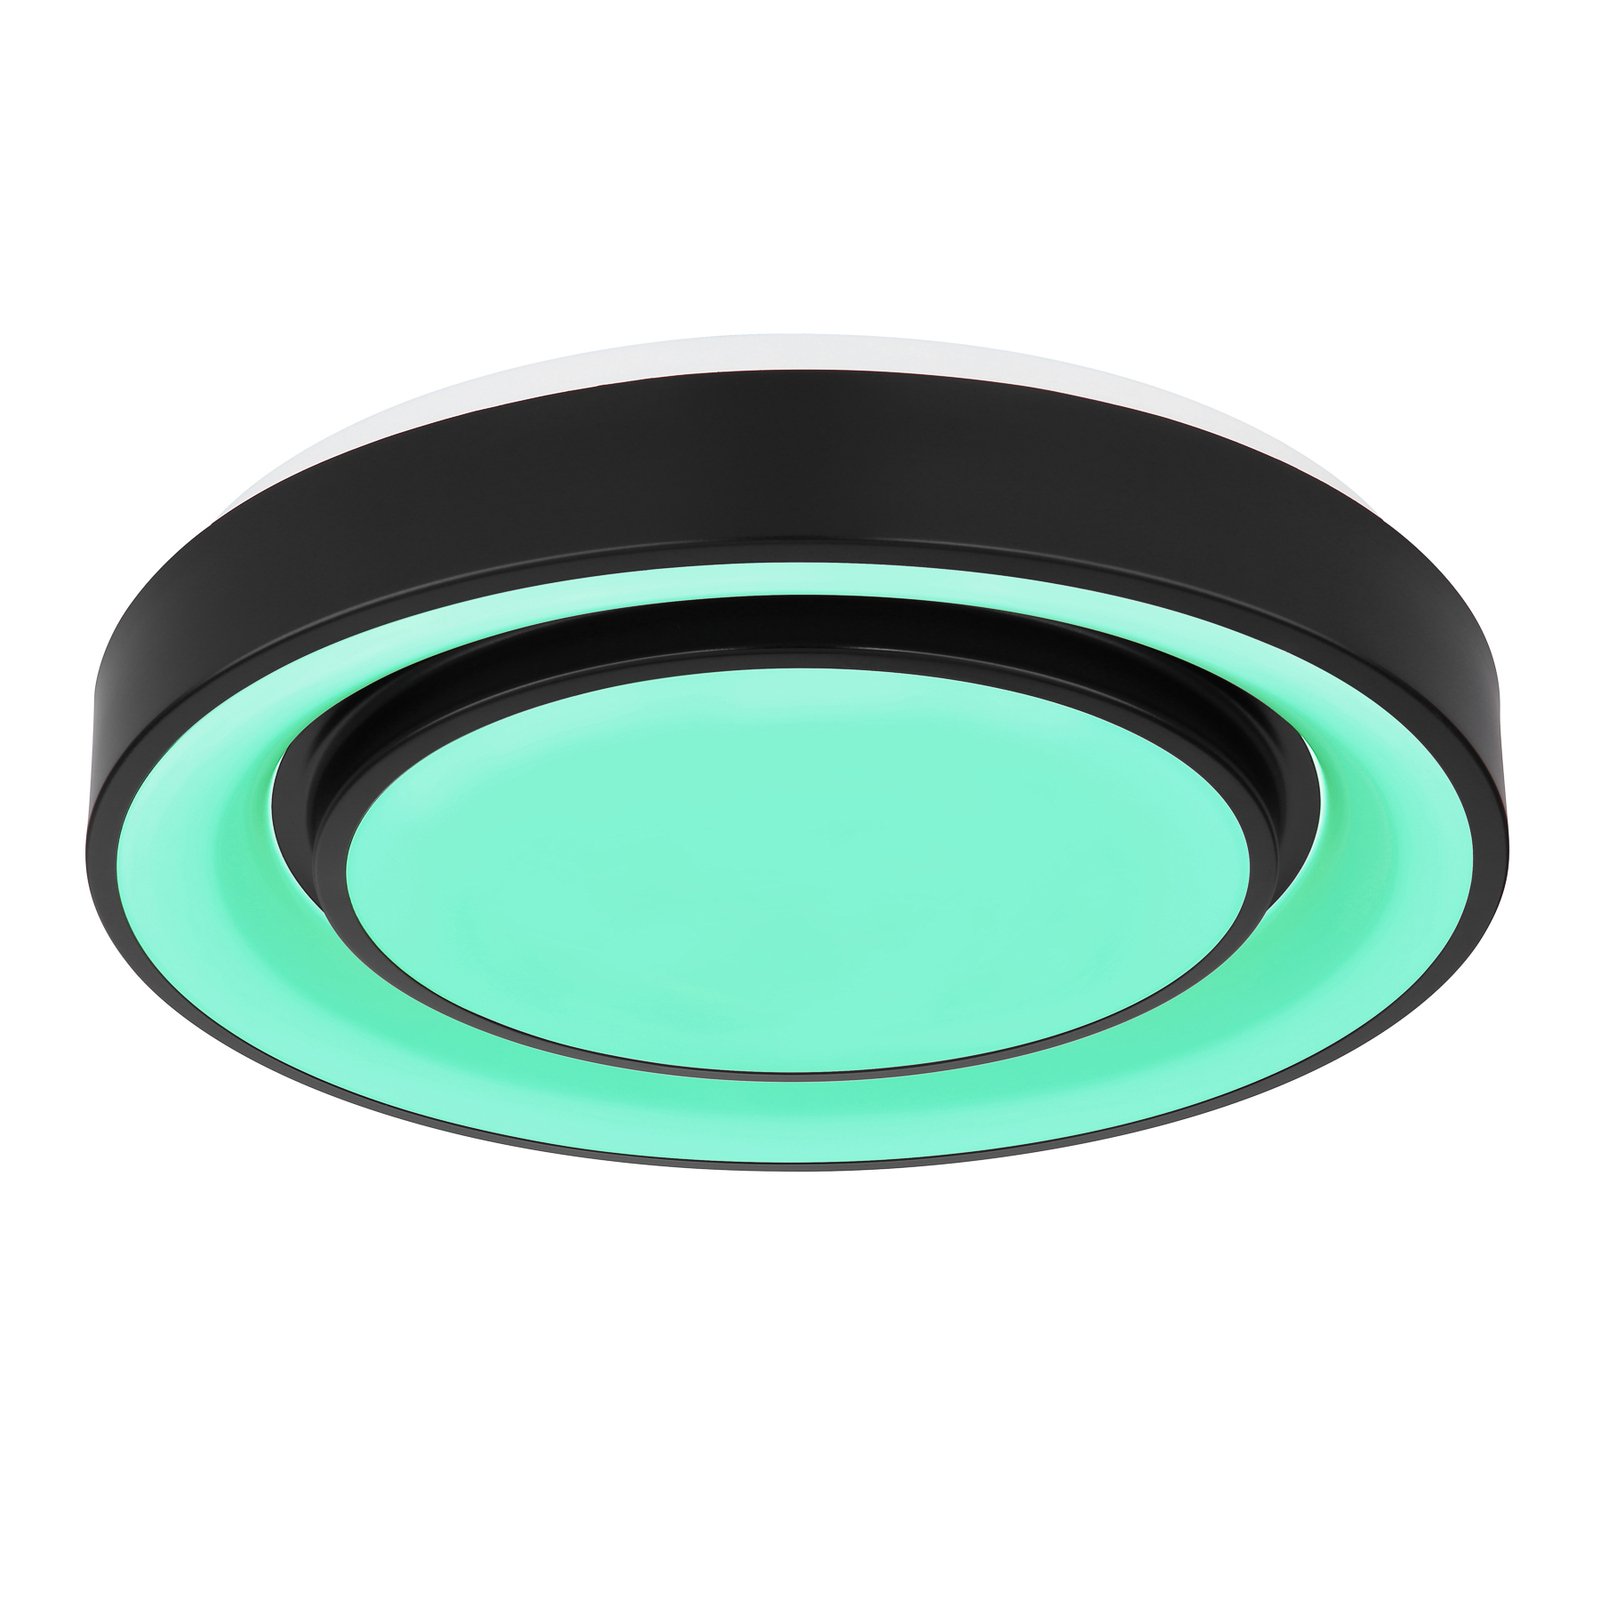 Sully LED ceiling light RGBW remote control black